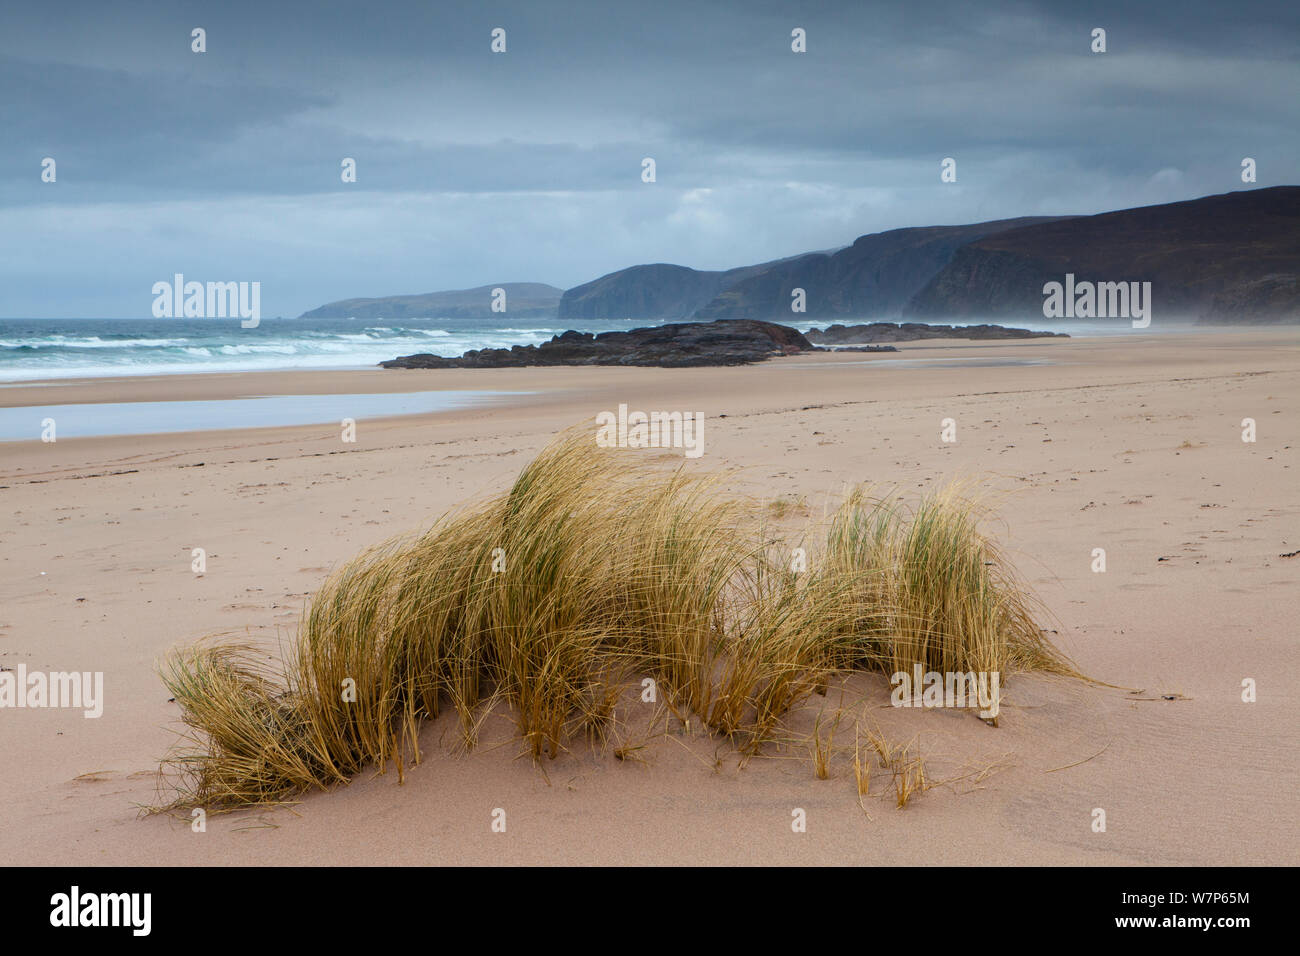 Sandwood Bay with clump of Marram grass growing on the beach, Sutherland, Scotland April 2012 Stock Photo